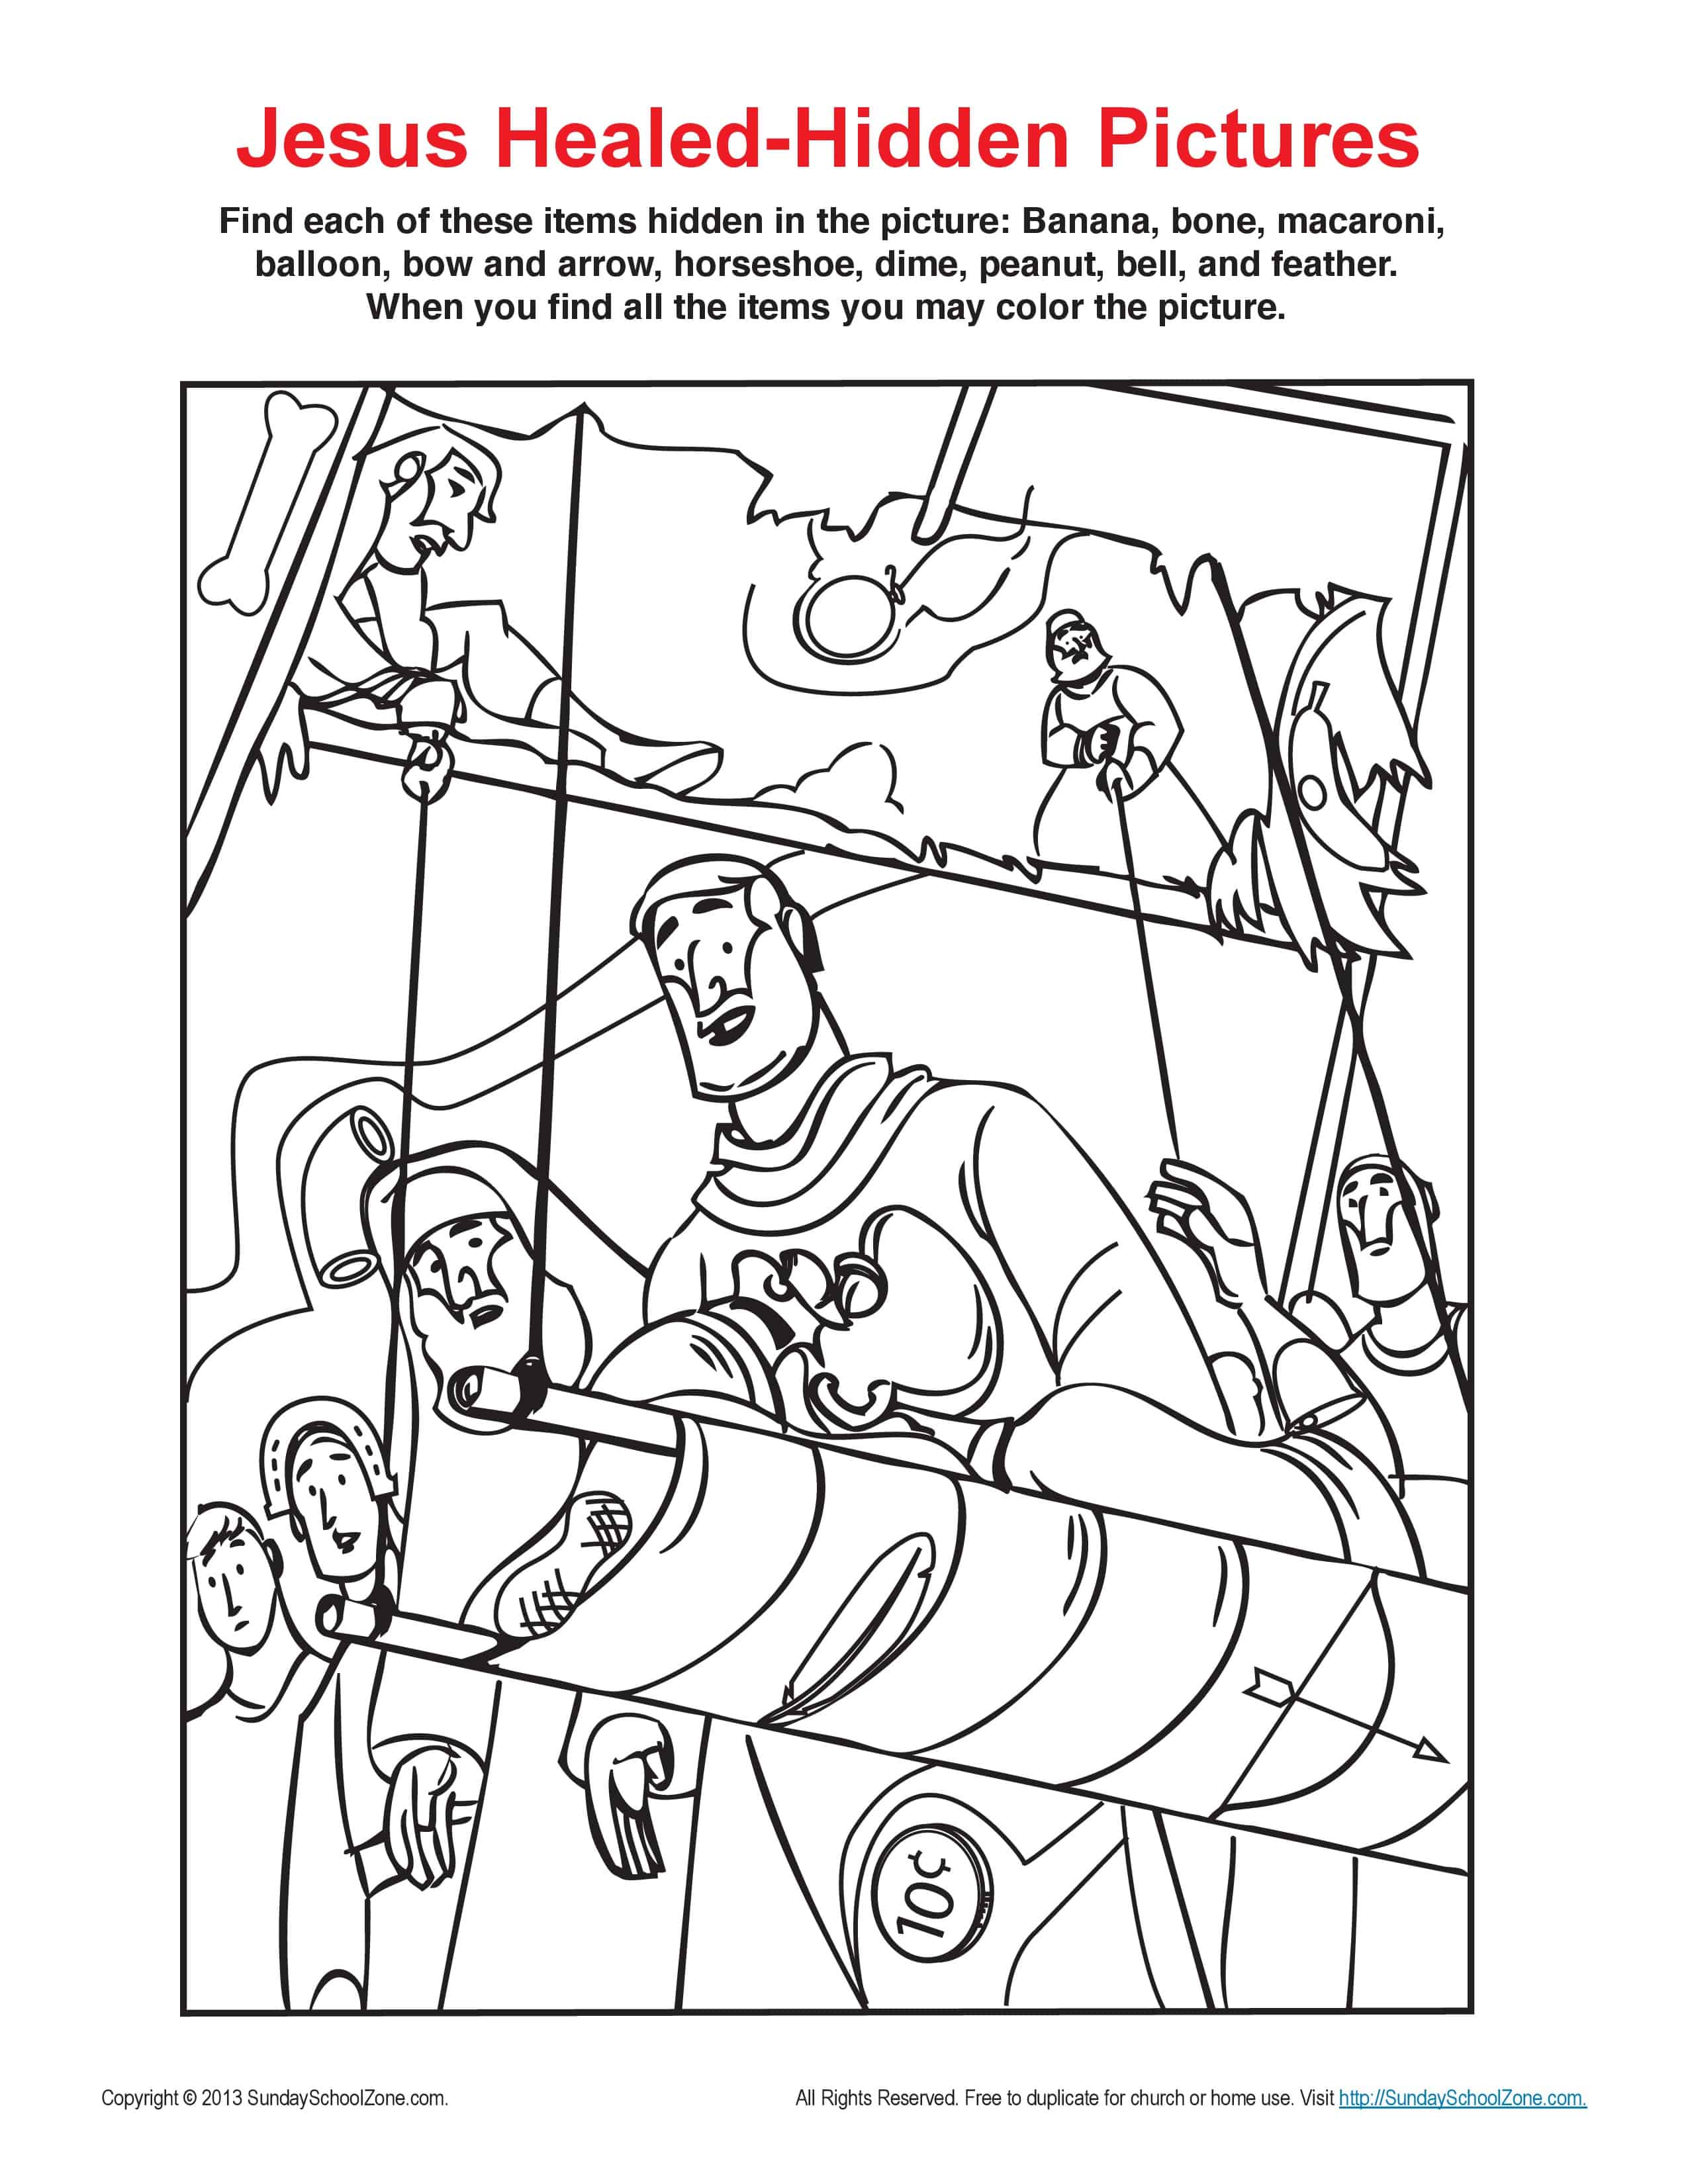 Jesus Healed the Paralytic Hidden Pictures Bible Coloring Page